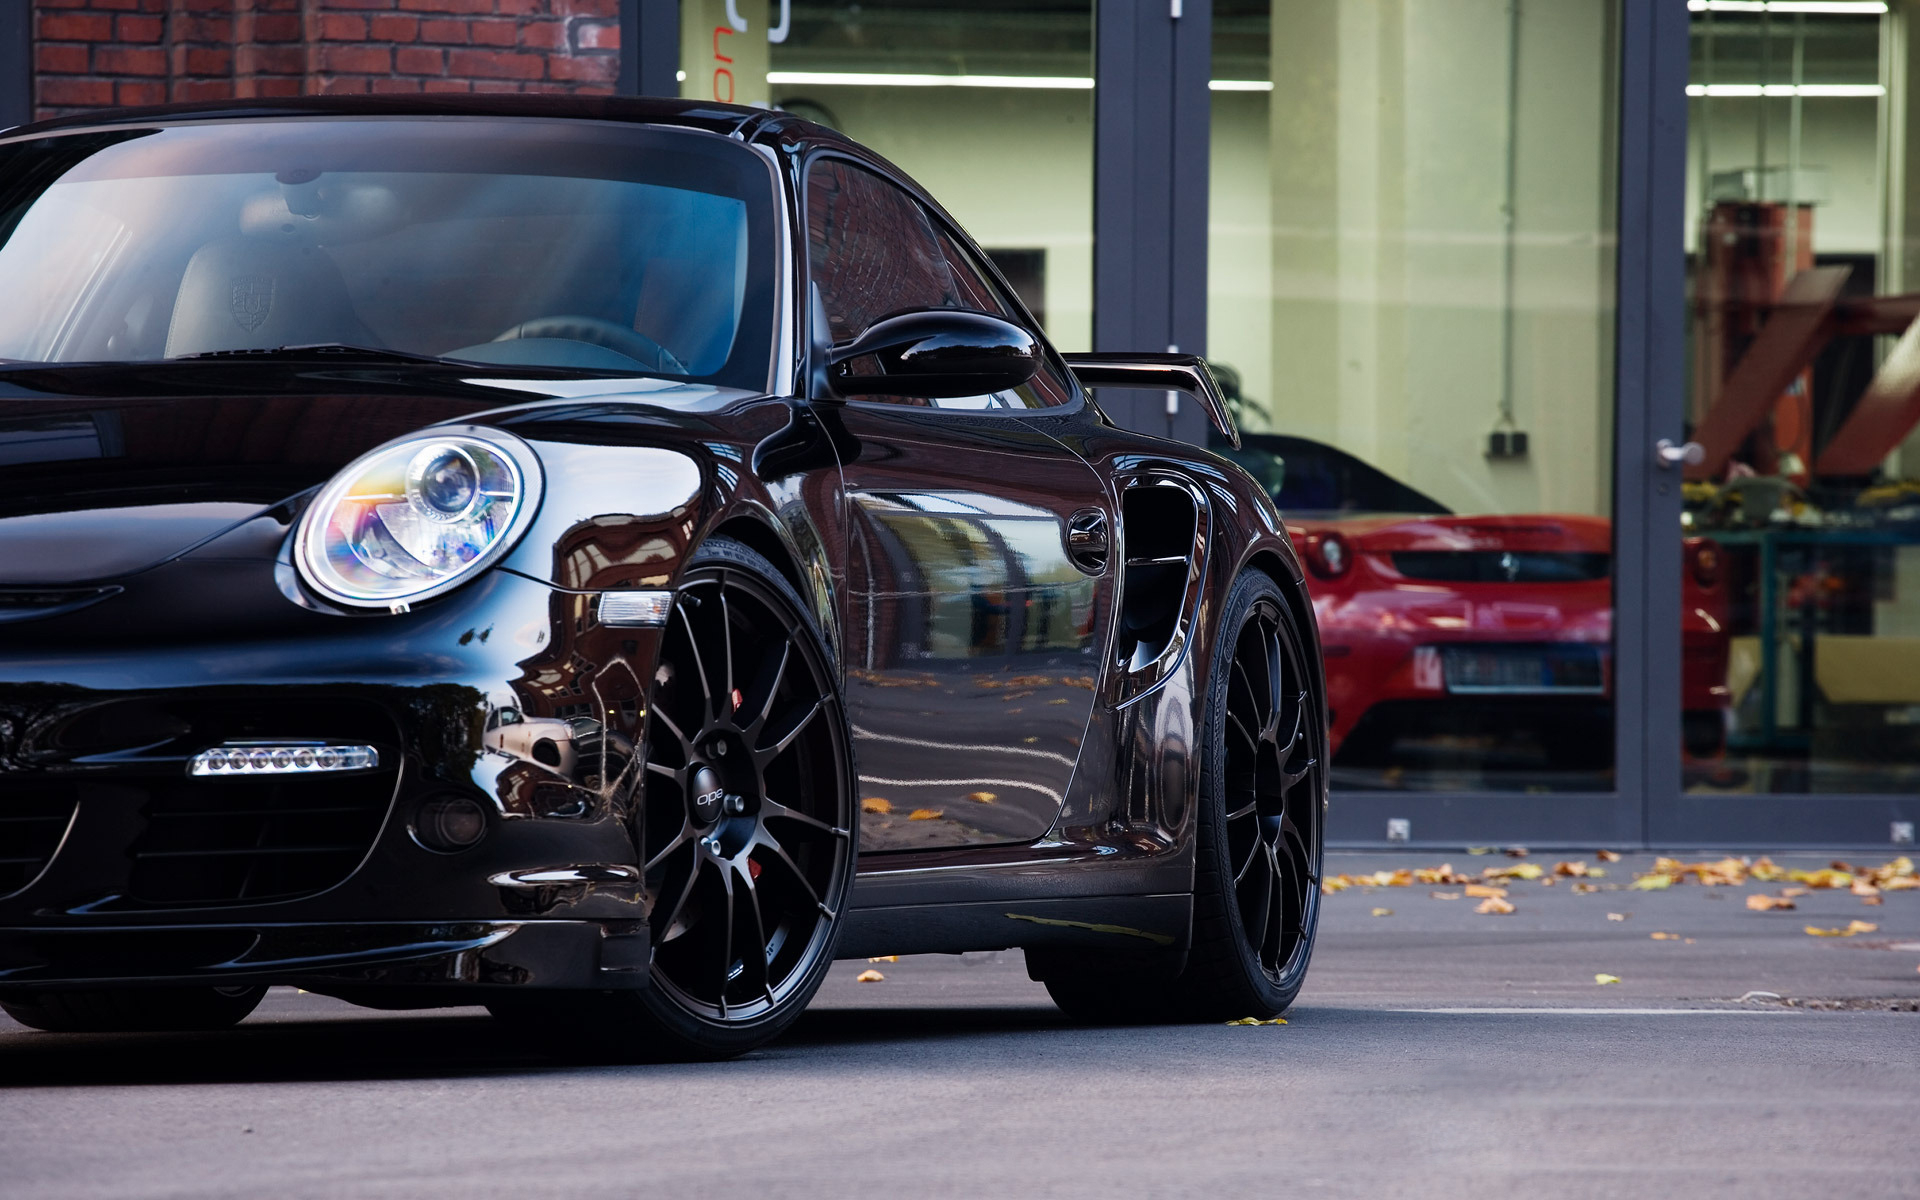 Porshe 997 Turbo wallpapers and images - wallpapers, pictures, photos